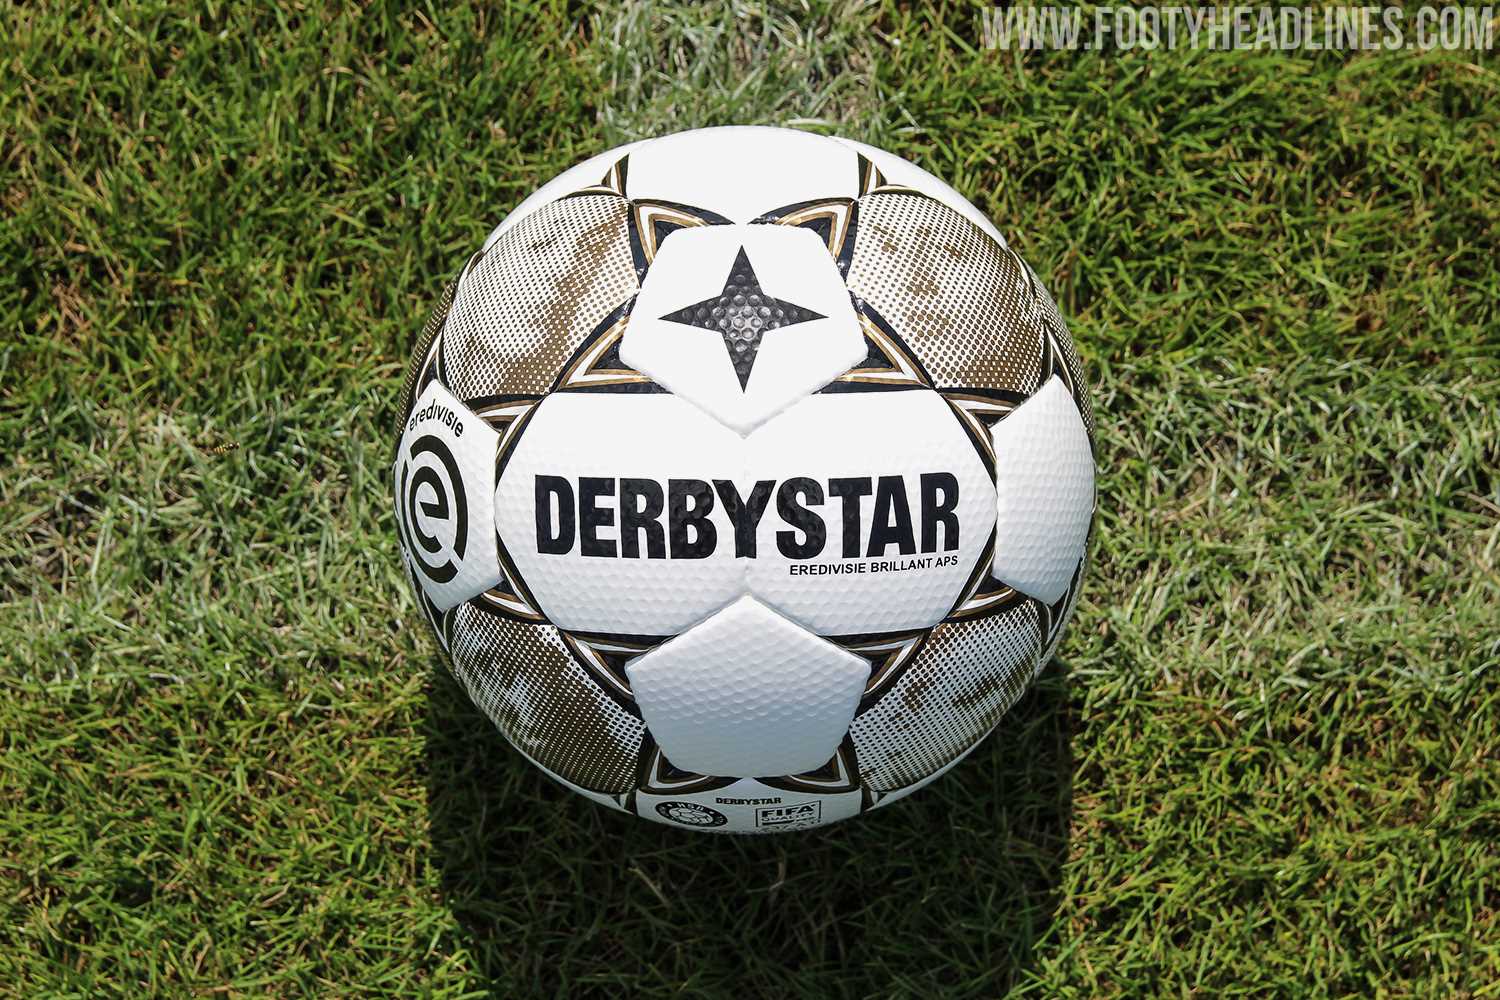 Derbystar Eredivisie 20-21 Ball Released By Music Labels Top Notch and Ark - Headlines